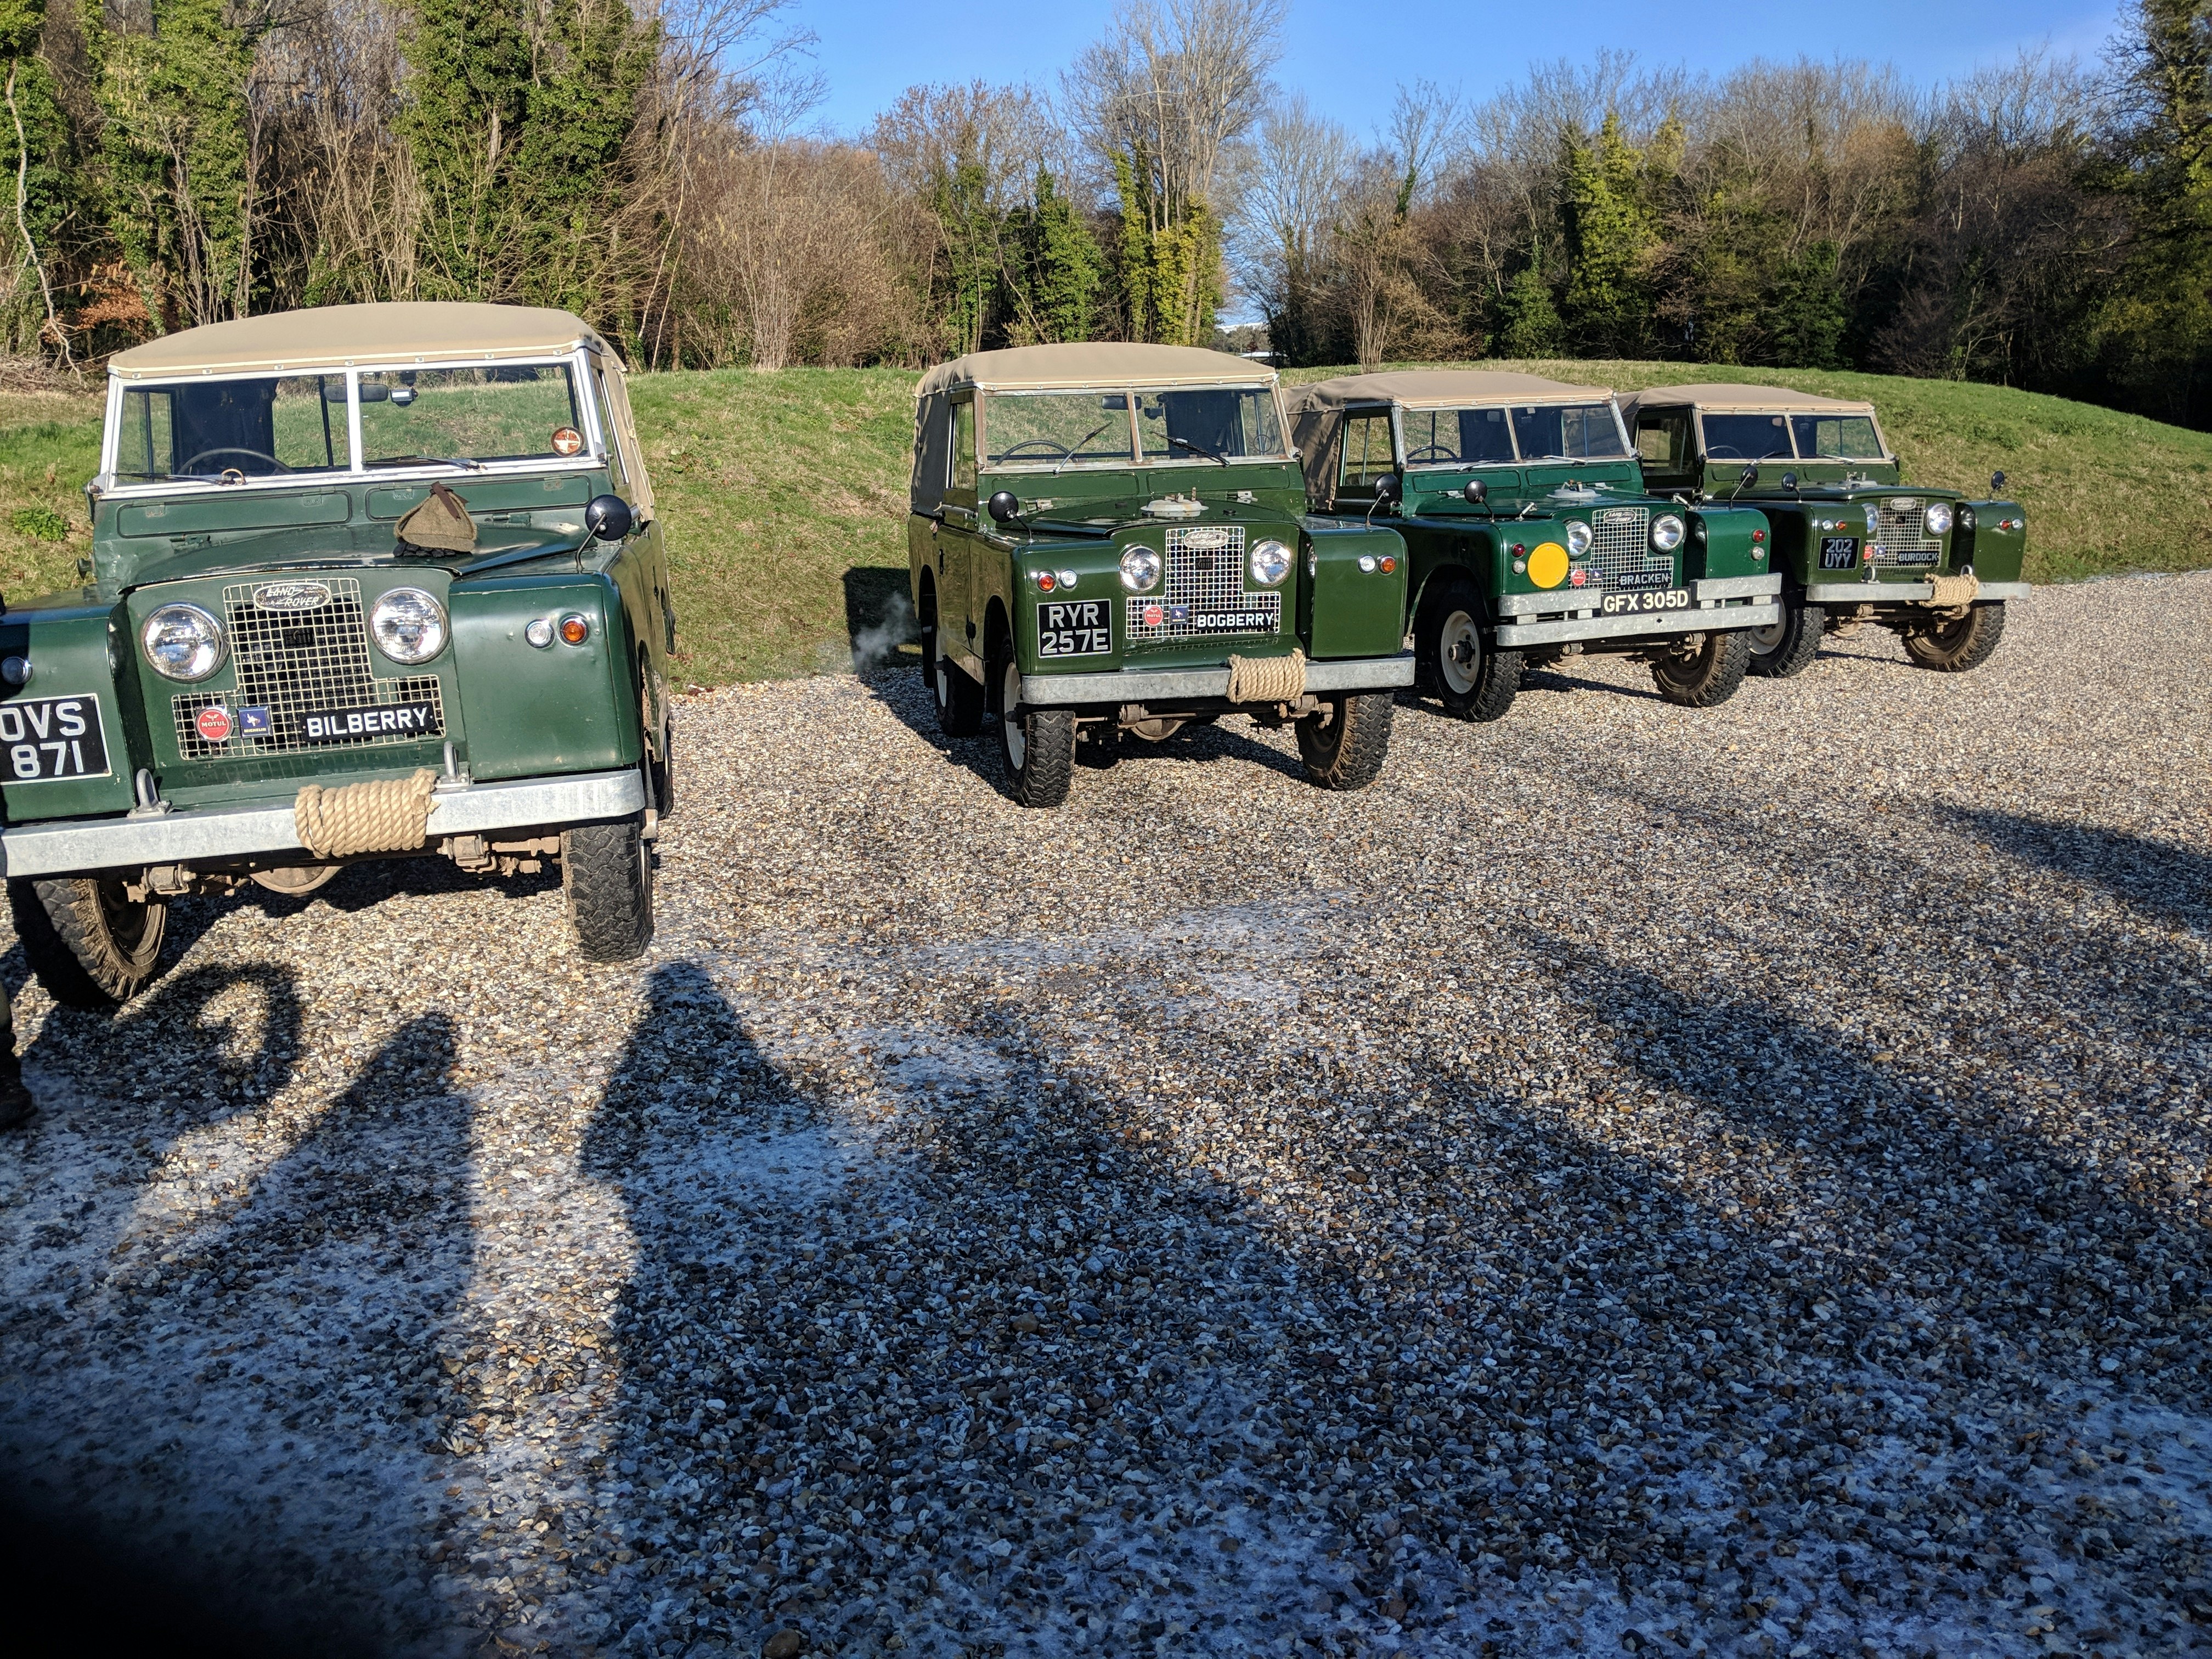 Vintage Land Rover off-roading experience at Goodwood Estate